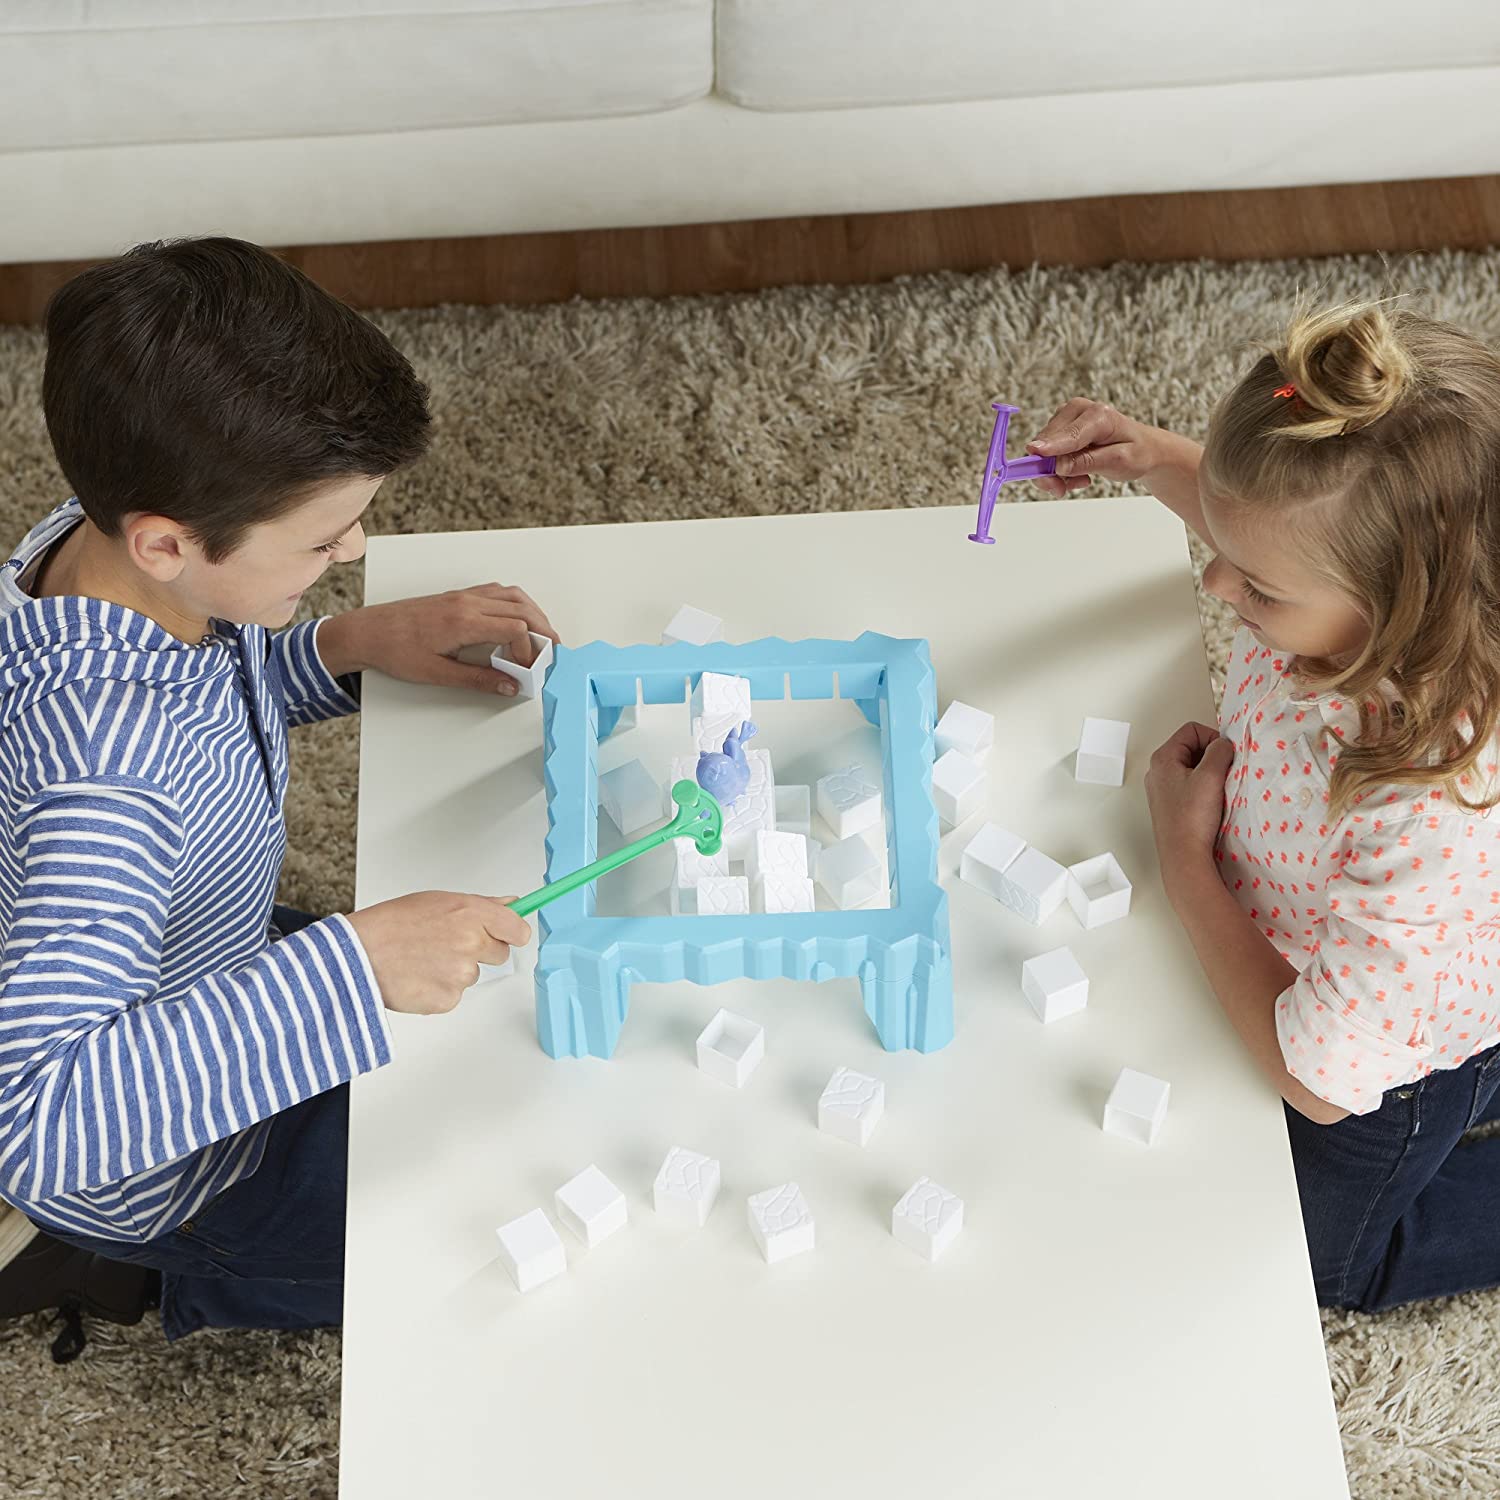 Don't Break the Ice Game, Multicolor - with 2-4 Players and Ages 3 Years and Up